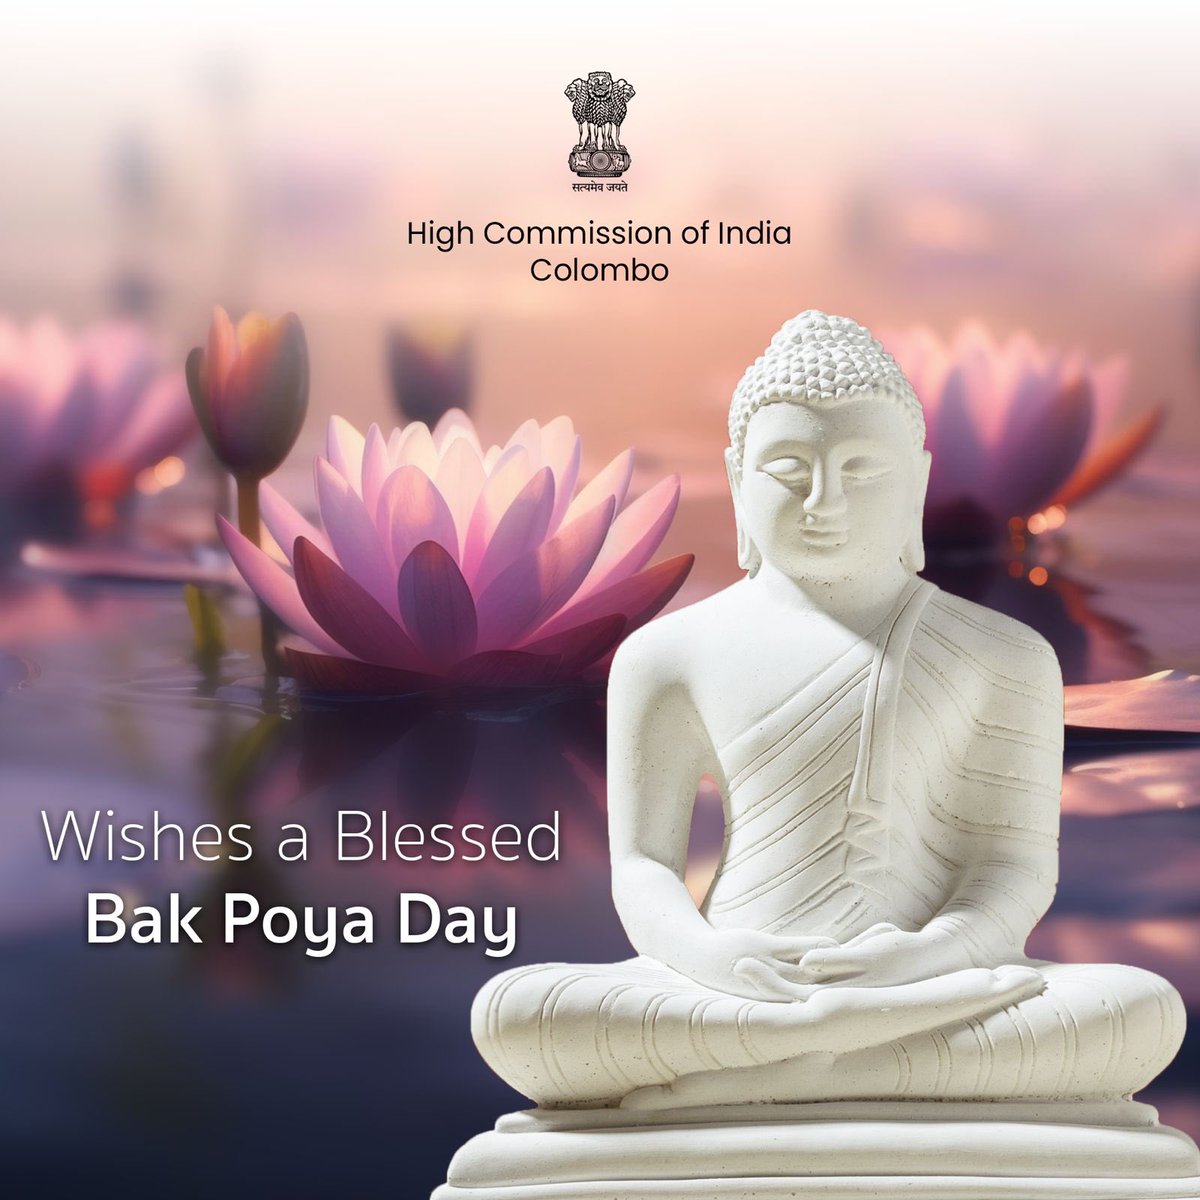 High Commission of India wishes everyone a blessed Bak Full Moon Poya Day which commemorates the second visit of Lord Buddha to Sri Lanka.